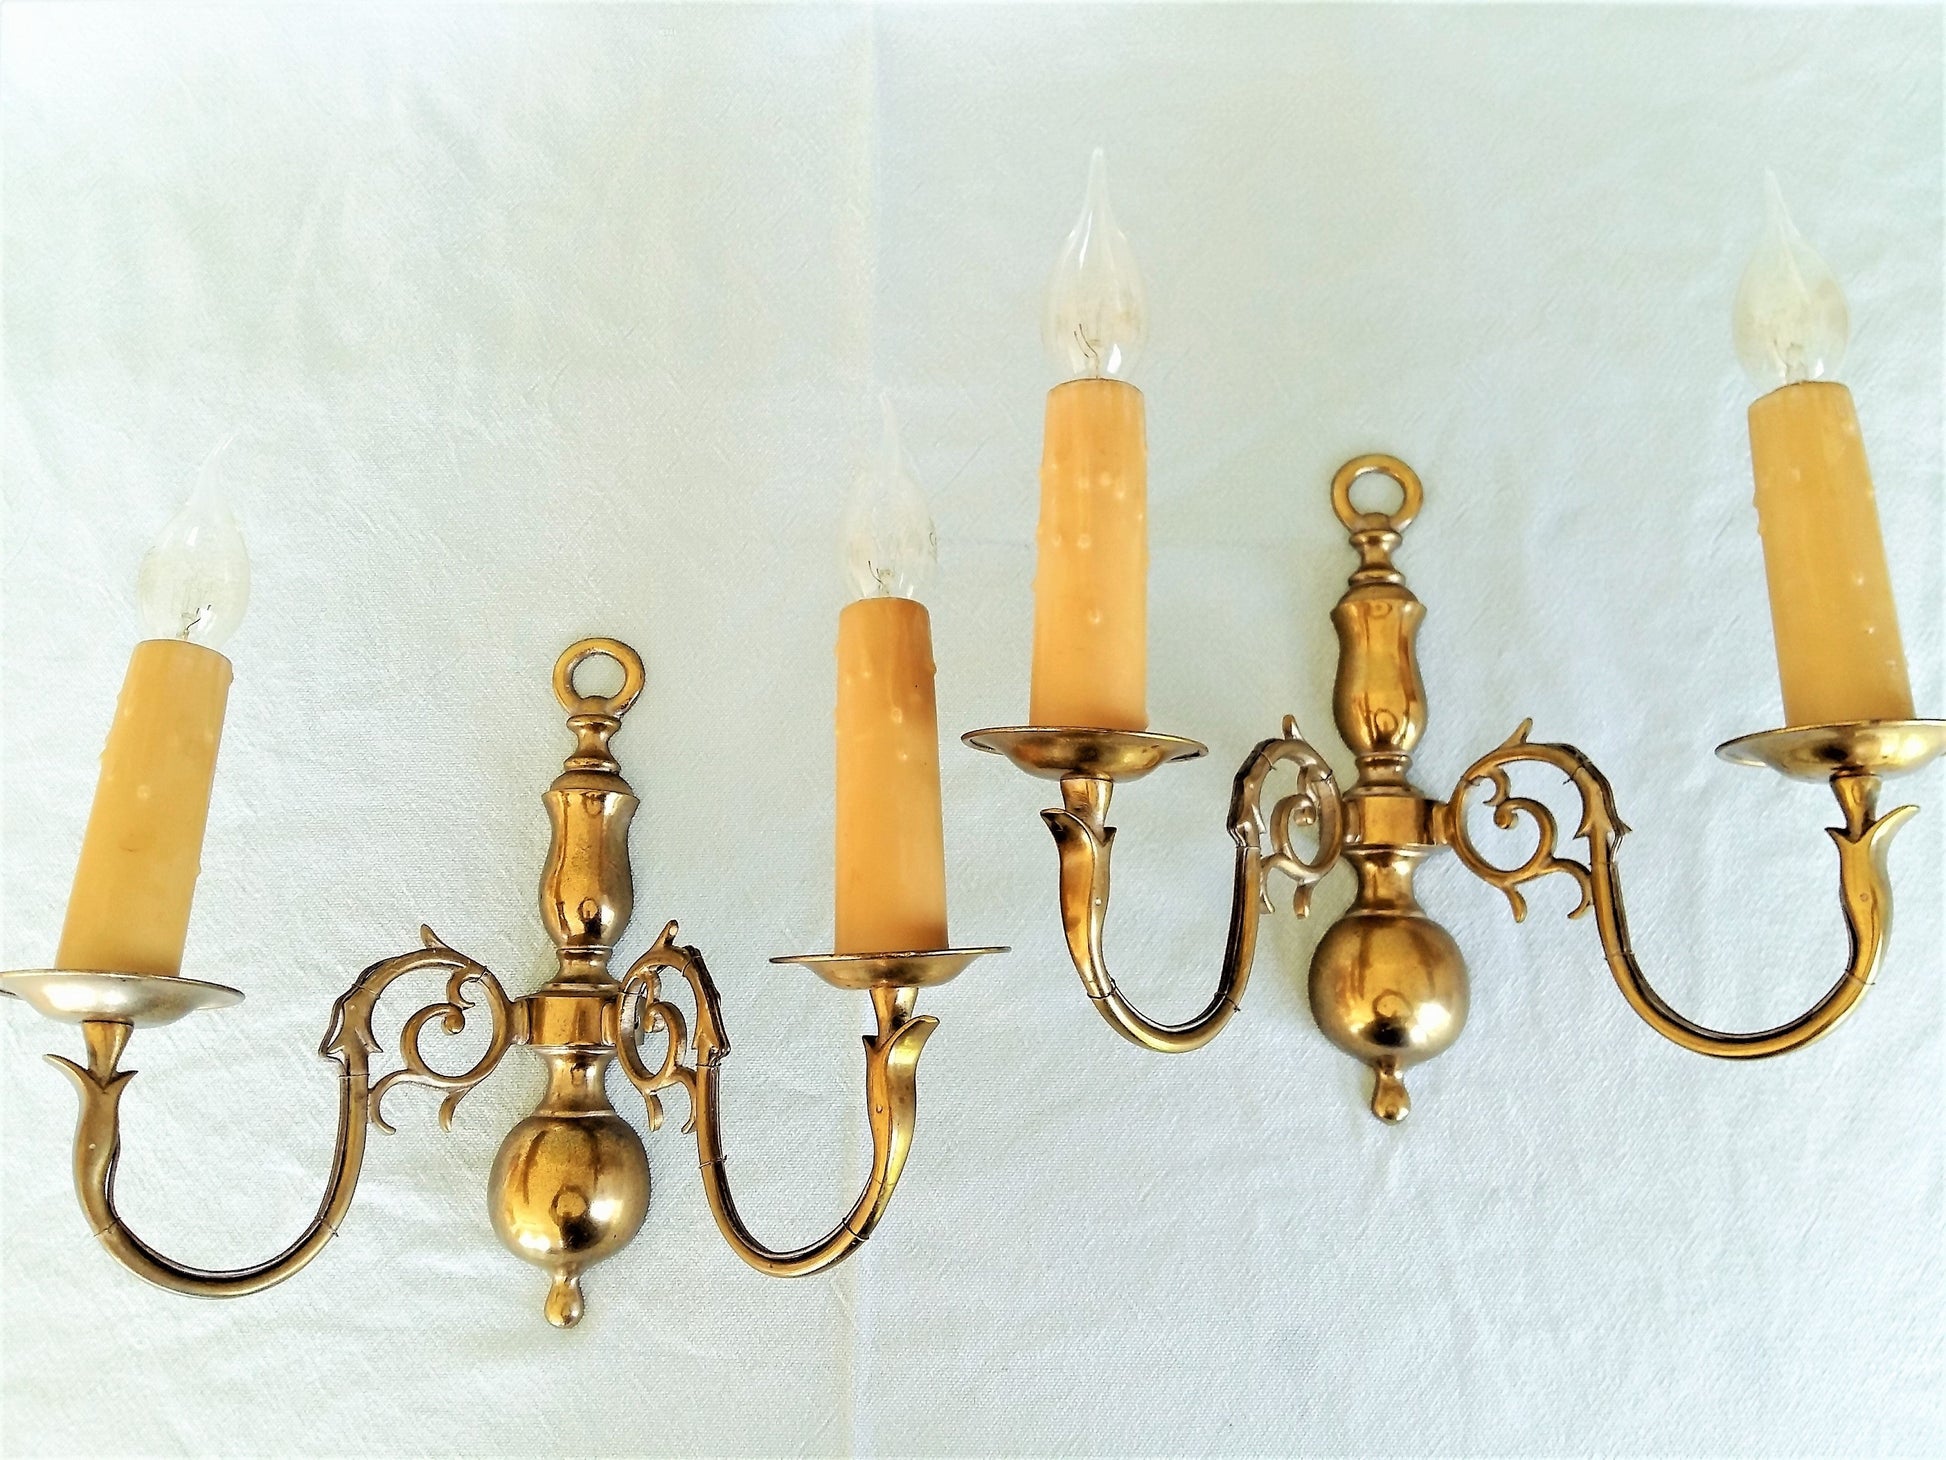 Pair of Bronze Wall Light/ Sconces from Tiggy & Pip - €140.00! Shop now at Tiggy and Pip